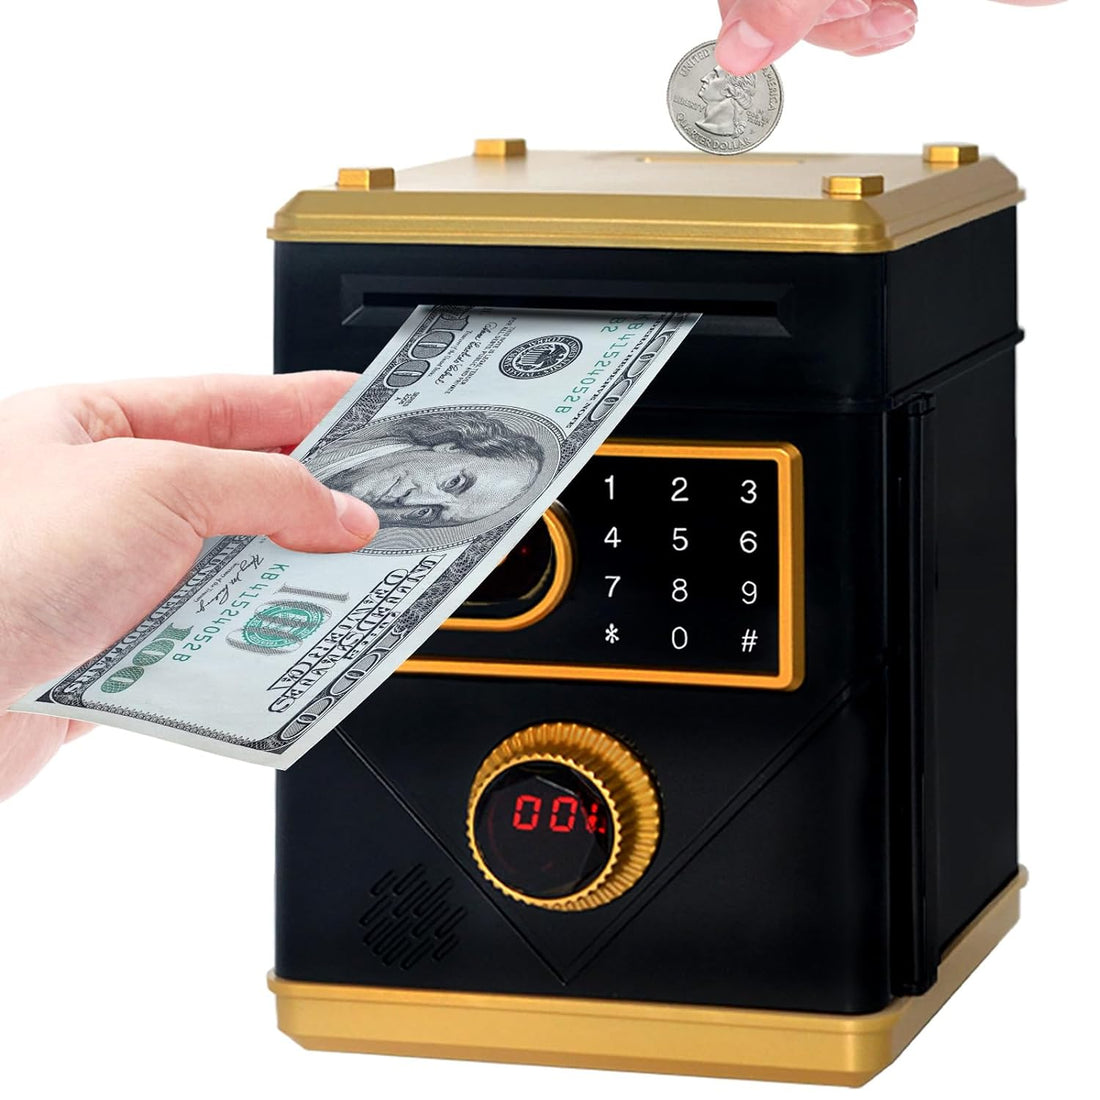 Upgrade Electronic Piggy Bank for Kids,Touch Screen Money Bank Digital Counting ATM Machine Bank Cash Coin Can with Password Saving Box,Toys for Girls Boys 5 6 7 8 9 10 11 12 Year Old Birthday Gifts